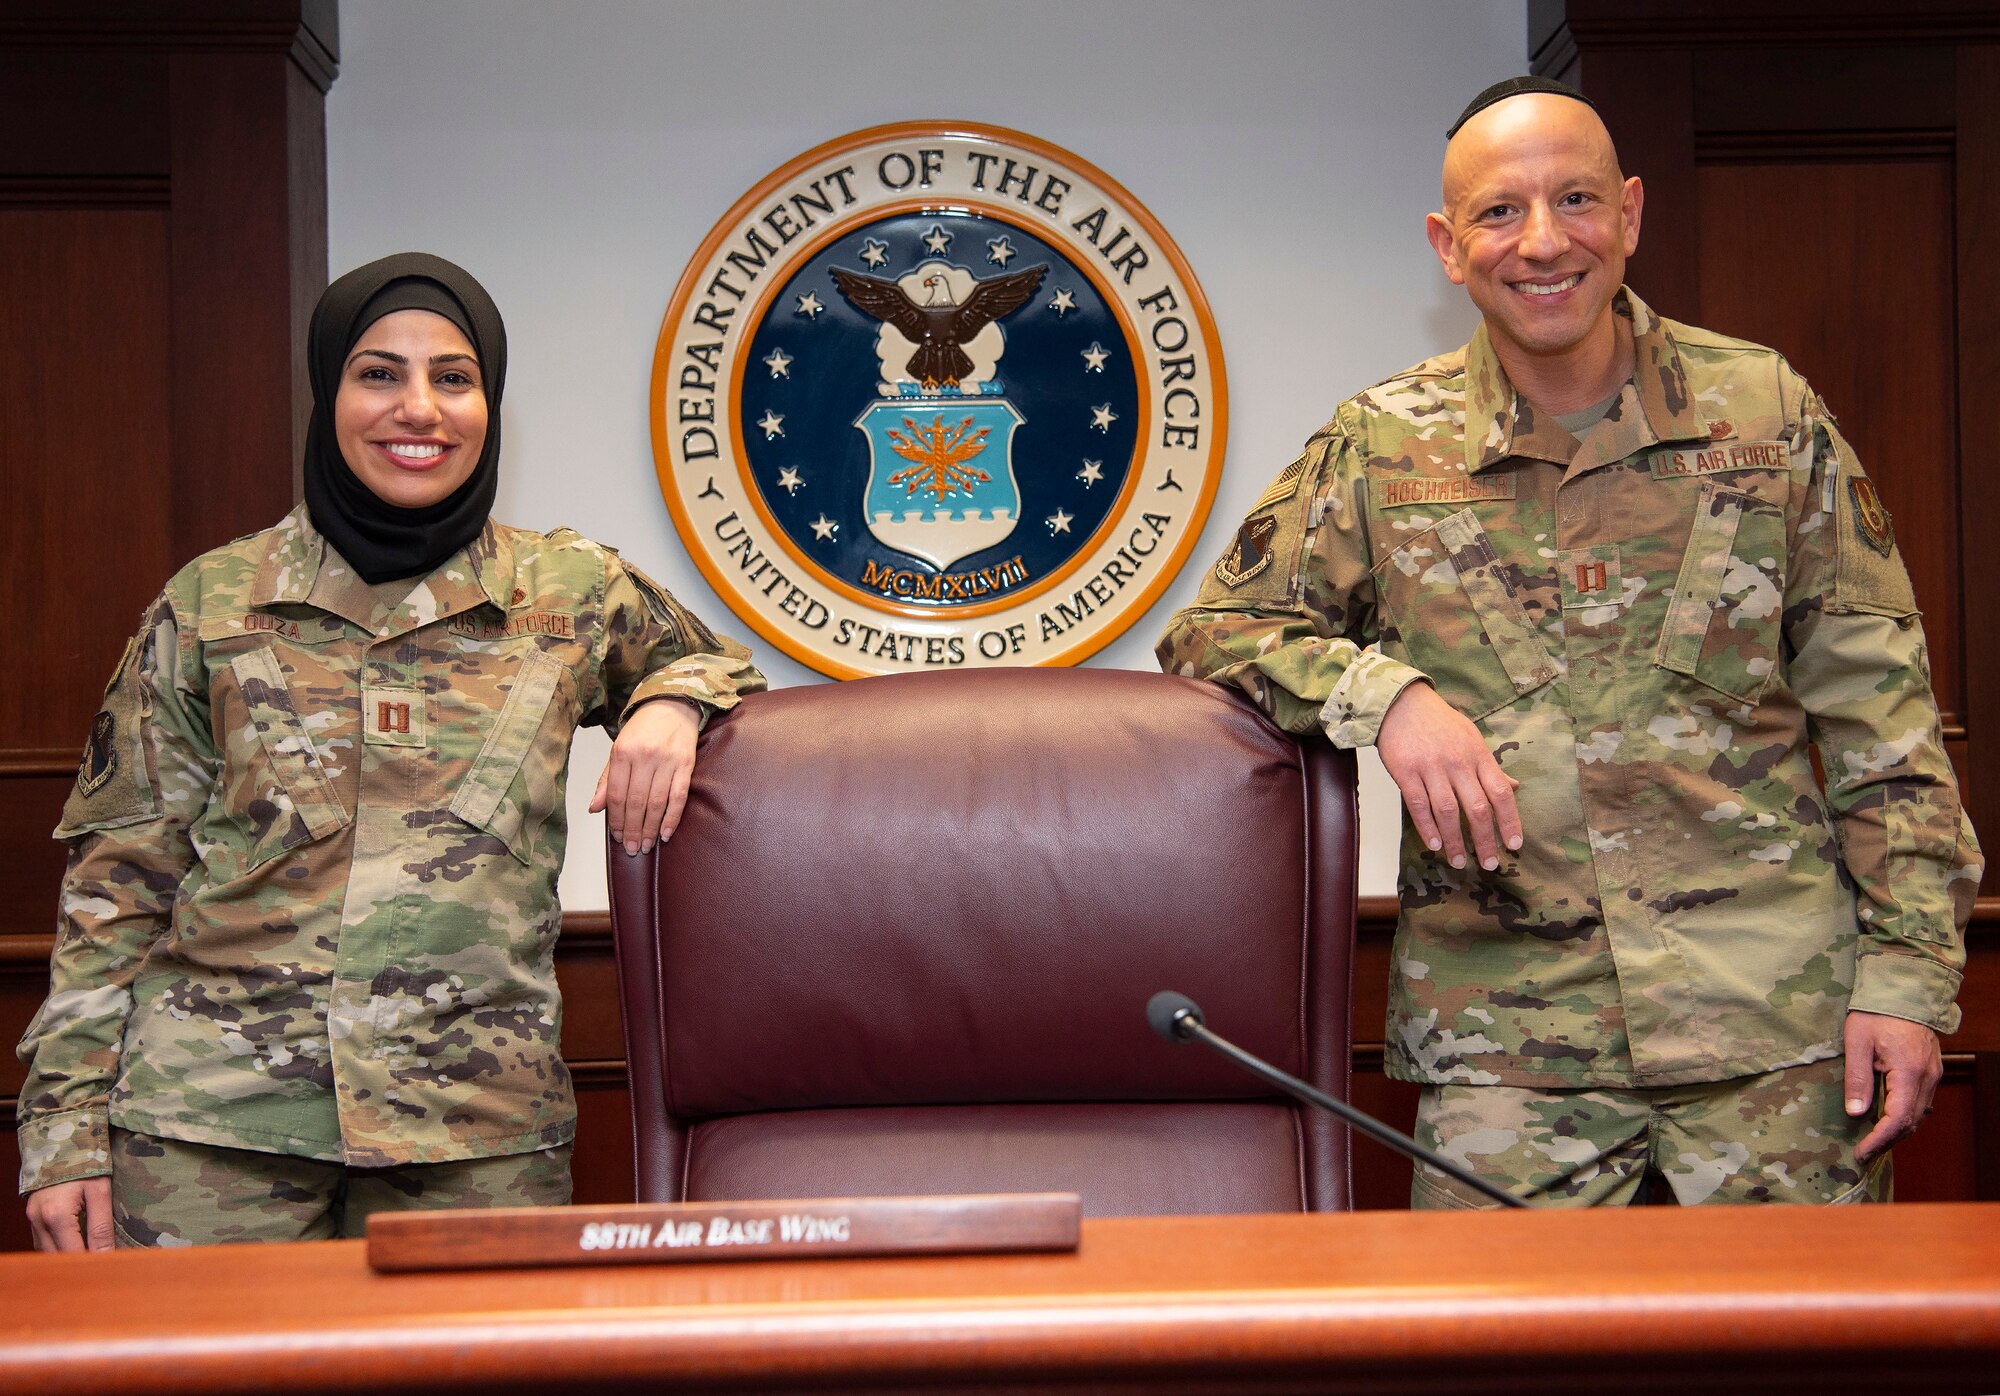 Capt. Maysaa Ouza (left), 88th Air Base Wing chief of adverse actions, and Capt. Yosef Hochheiser, Air Force reservist and 88 ABW assistant staff judge advocate, are pictured in the U.S. courtroom at Wright-Patterson Air Force Base on May 20. Their partnership helped establish the first religious-accommodation rule change for Muslims to wear a hijab in uniform. (US Air Force photo by R.J. Oriez)